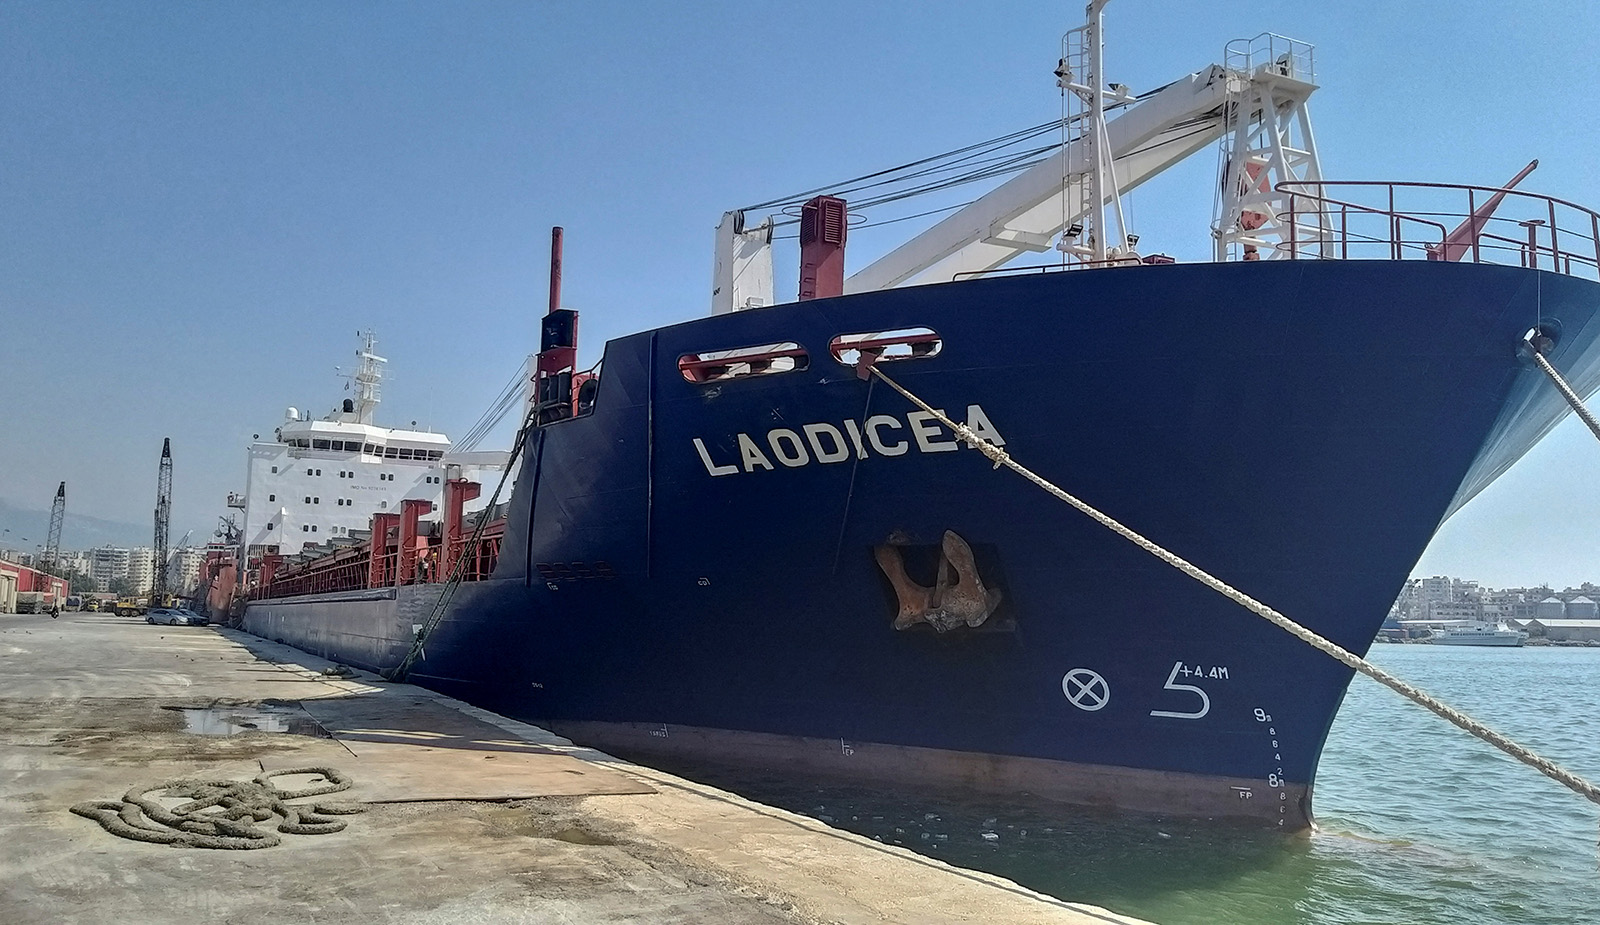 The ship Laodicea docked at the port of Tripoli in northern Lebanon, on July 29.